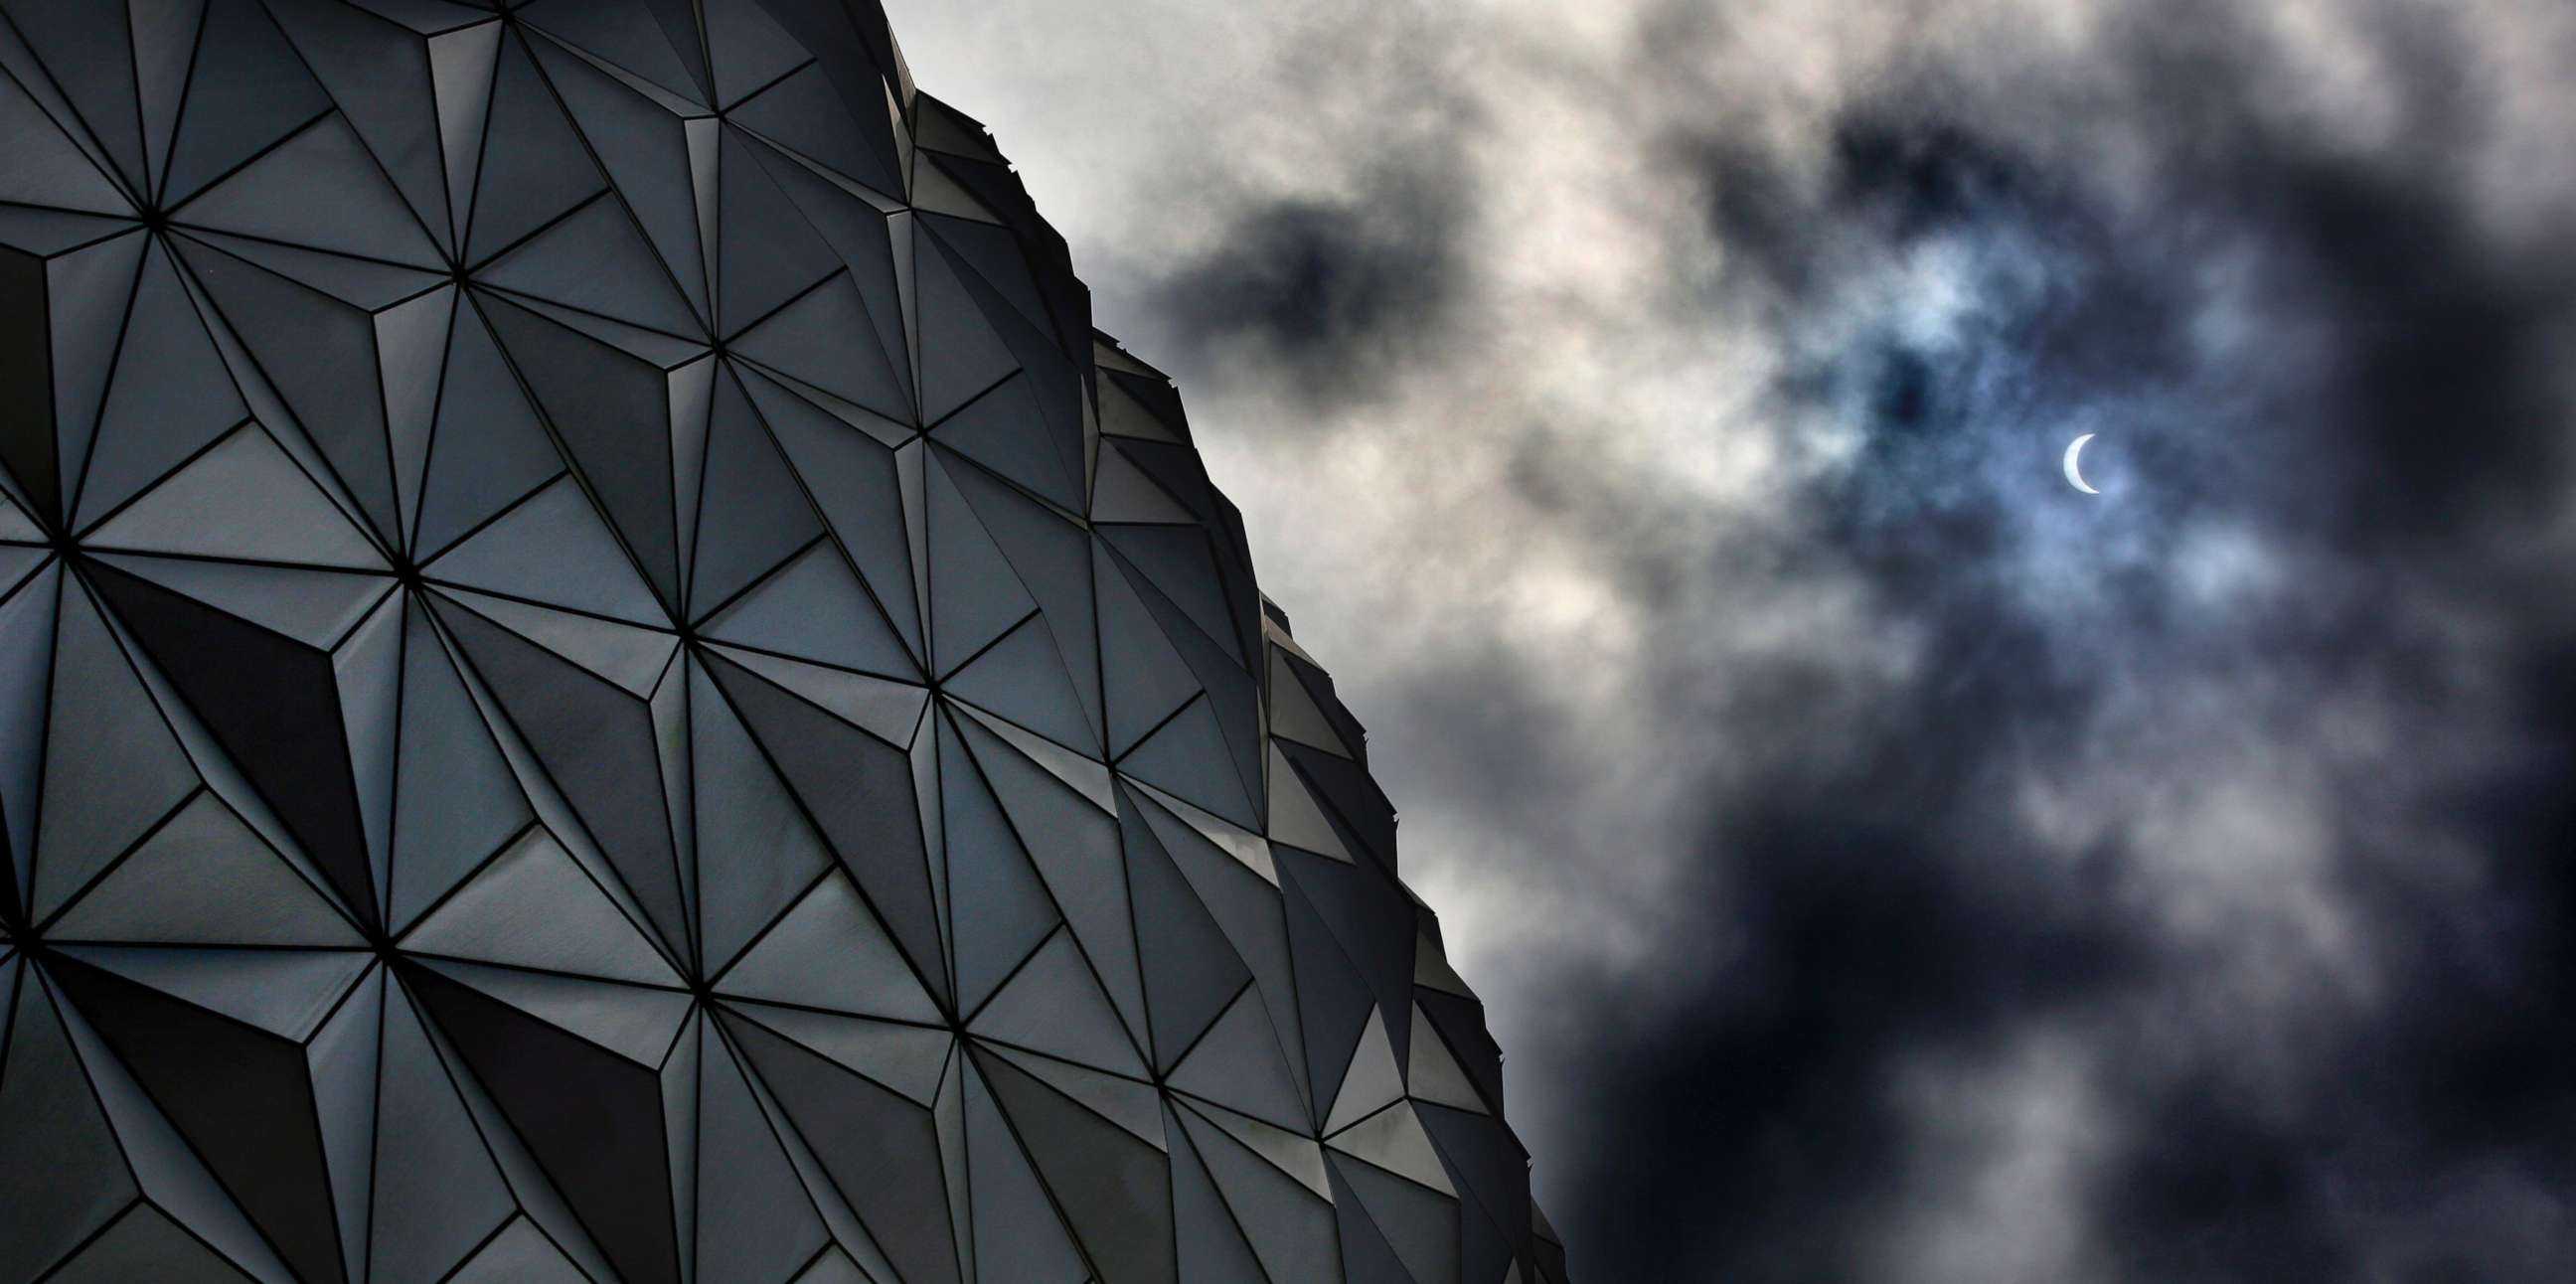 PHOTO: Rain clouds obscure the solar eclipse tracking over Spaceship Earth at Epcot at Walt Disney World in Lake Buena Vista, Florida, Aug. 21, 2017.